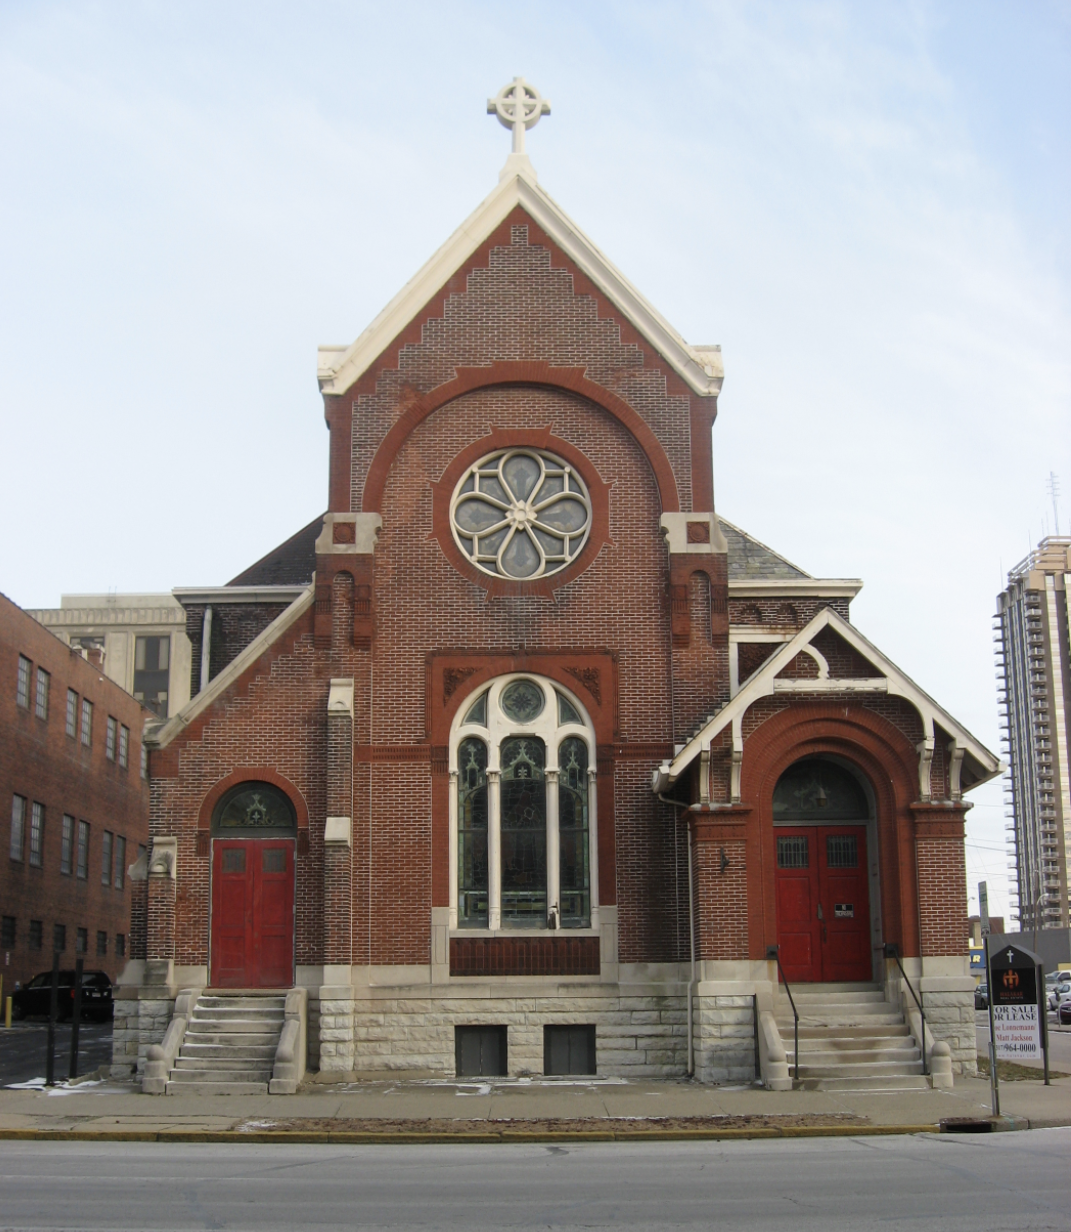 A brick church building with a large, round, central window above an arched window. The two entrances feature red doors.